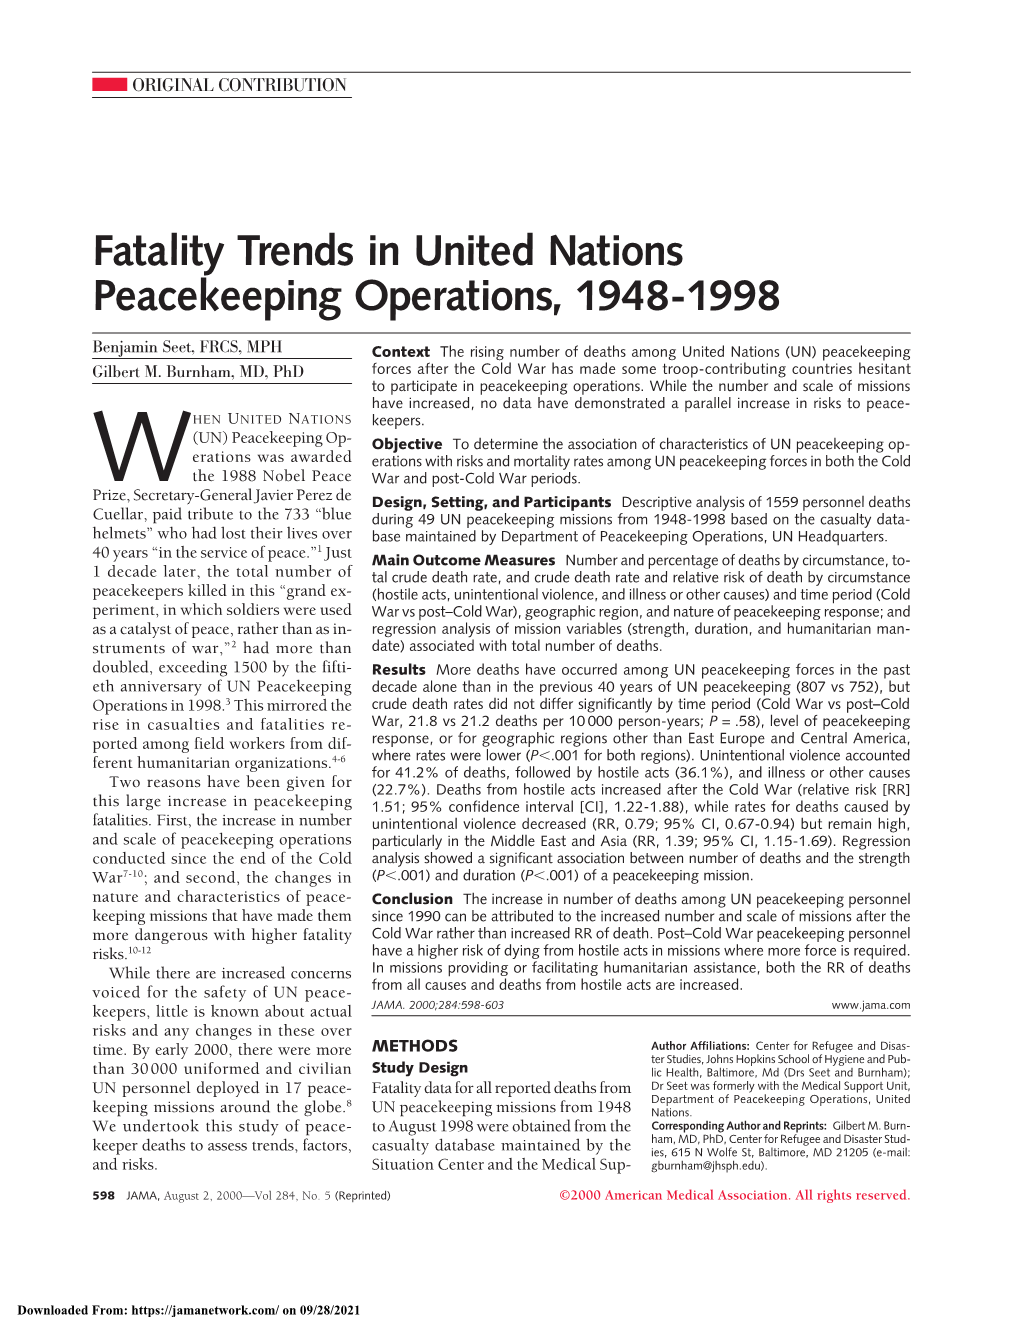 Fatality Trends in United Nations Peacekeeping Operations, 1948-1998